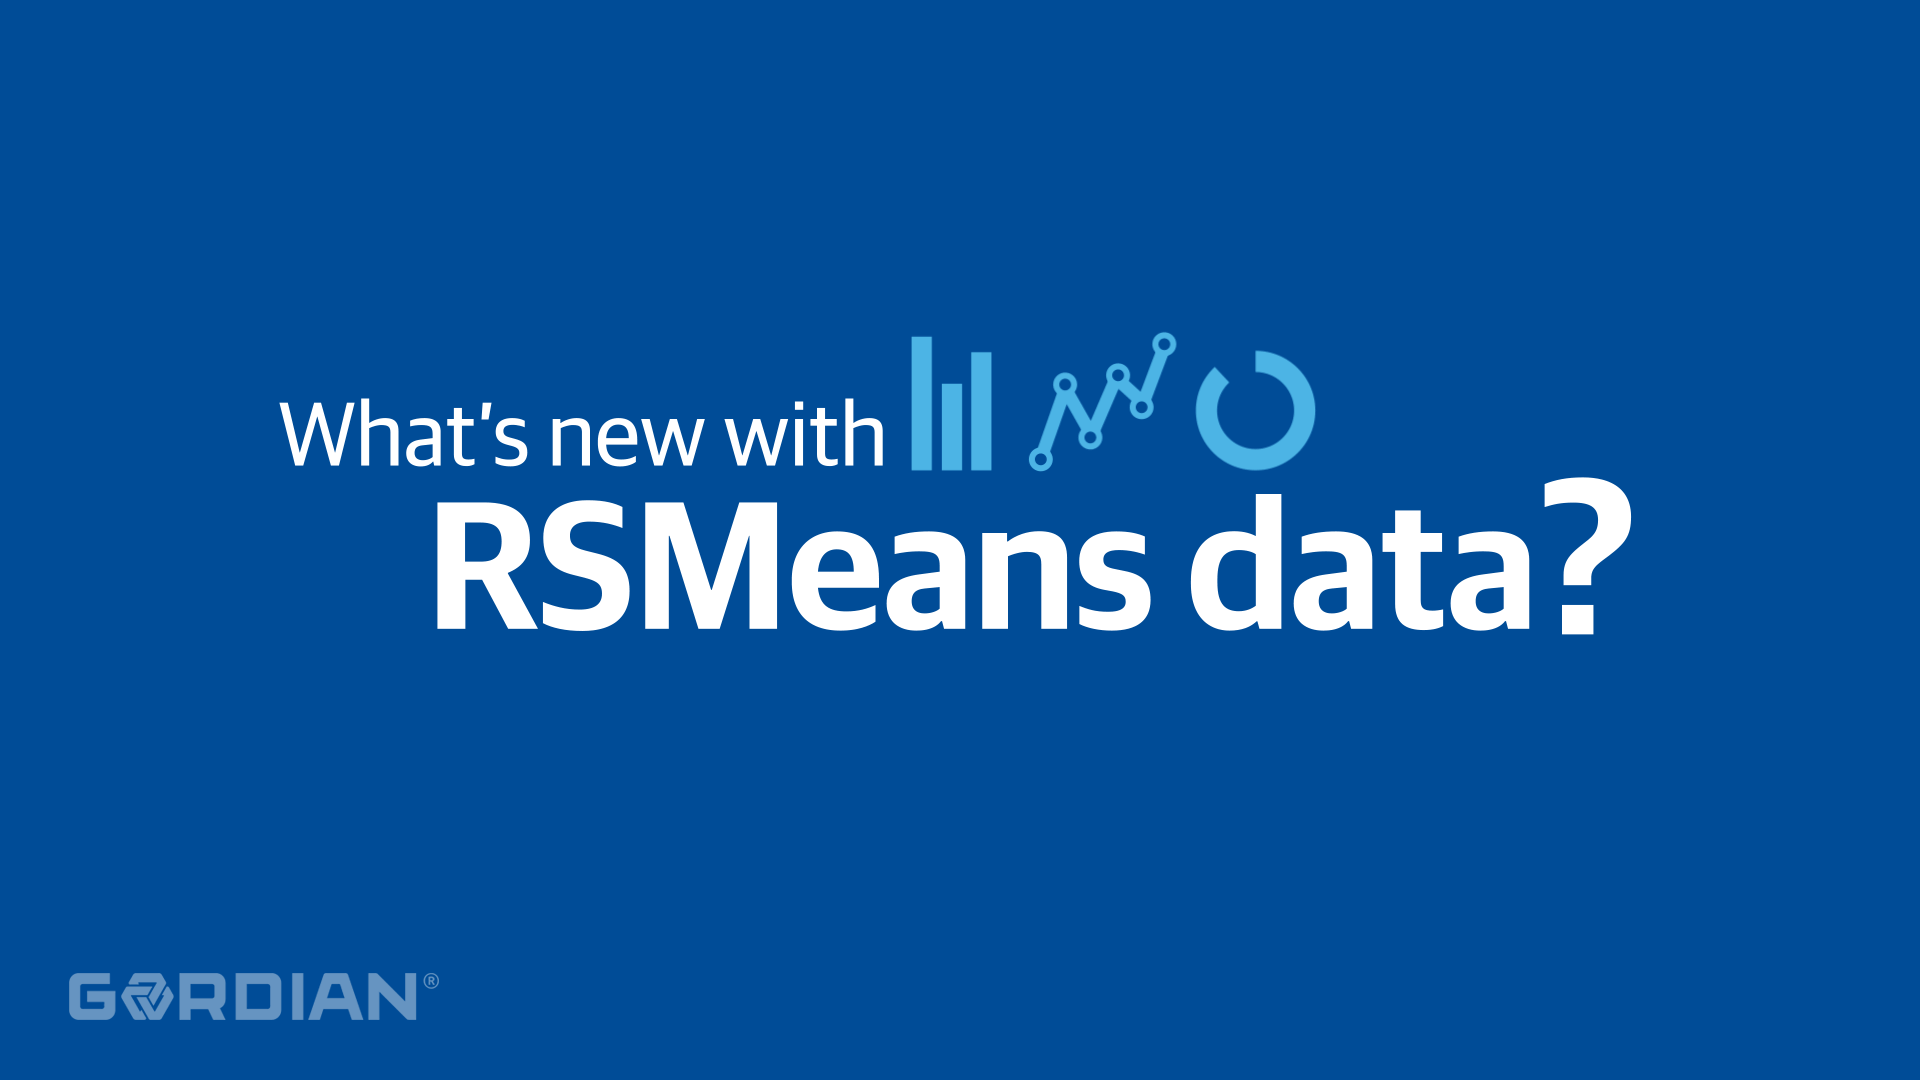 New in 2021 RSMeans data